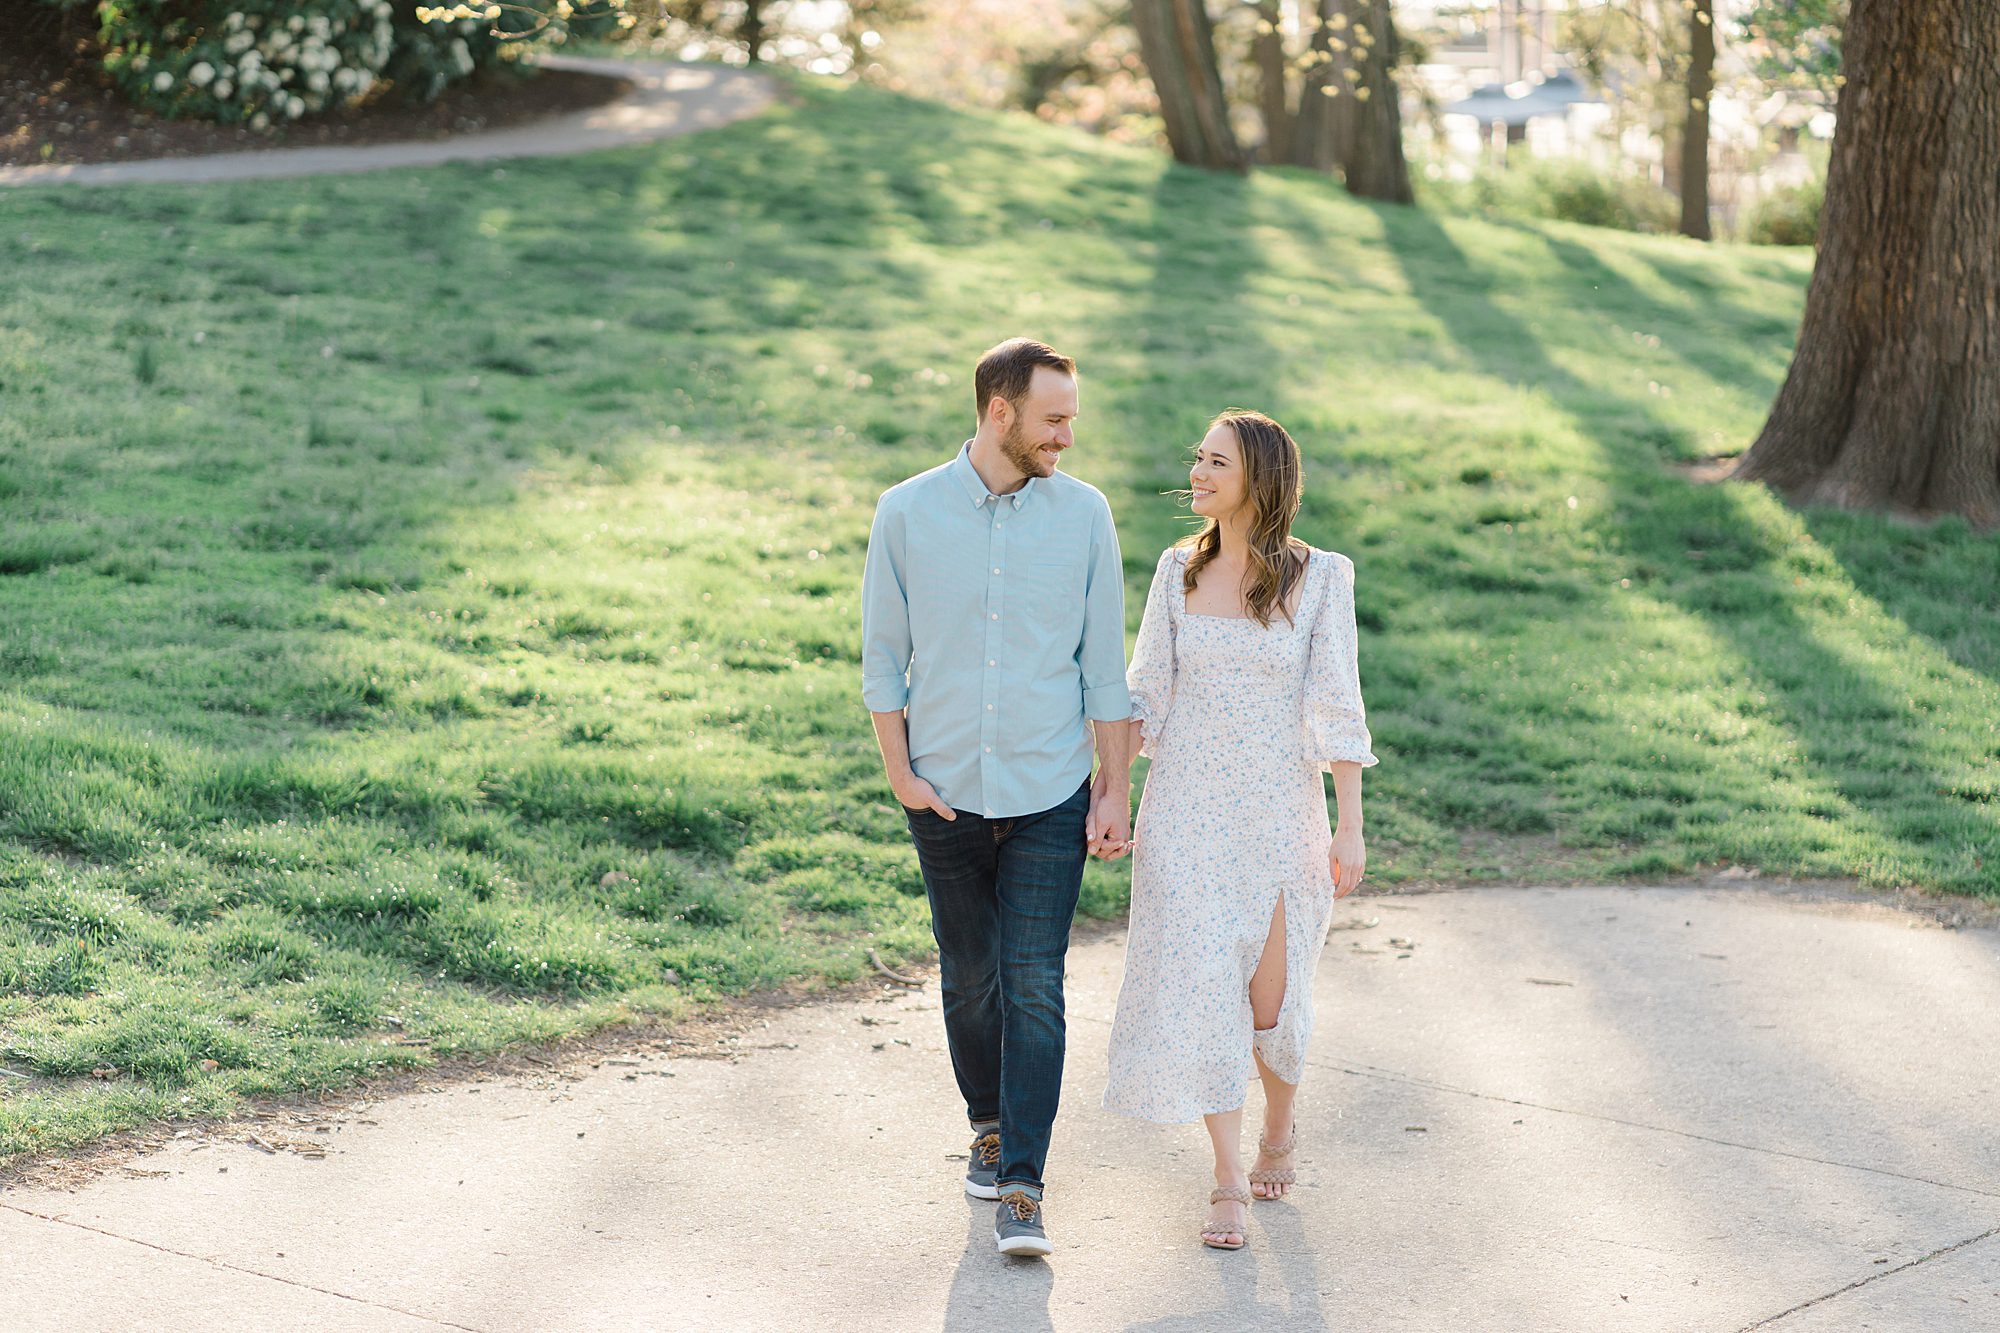 nature inspired engagement session in Philadelphia captured by Light + Airy Philadelphia Engagement photographer Amber Dawn